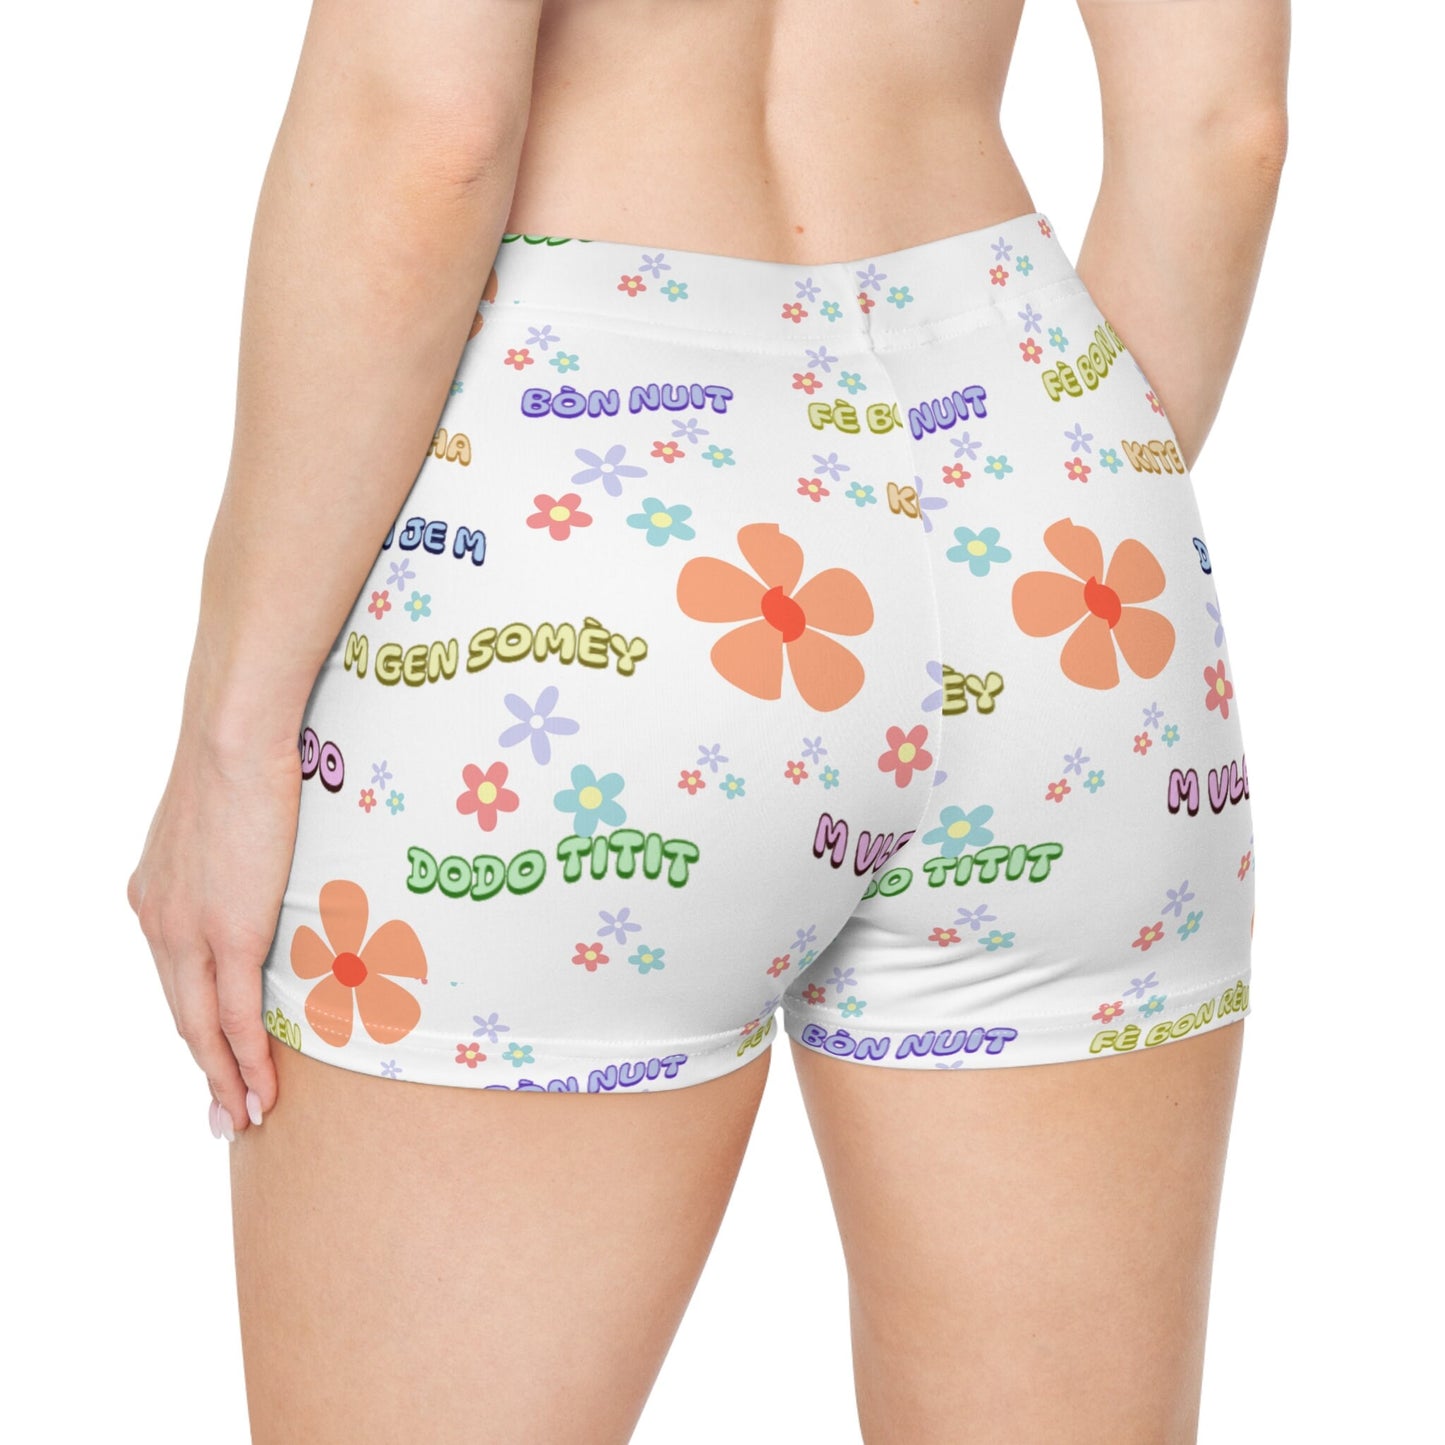 Women Shorts (AOP) for Lounging and sleeping - Dodo